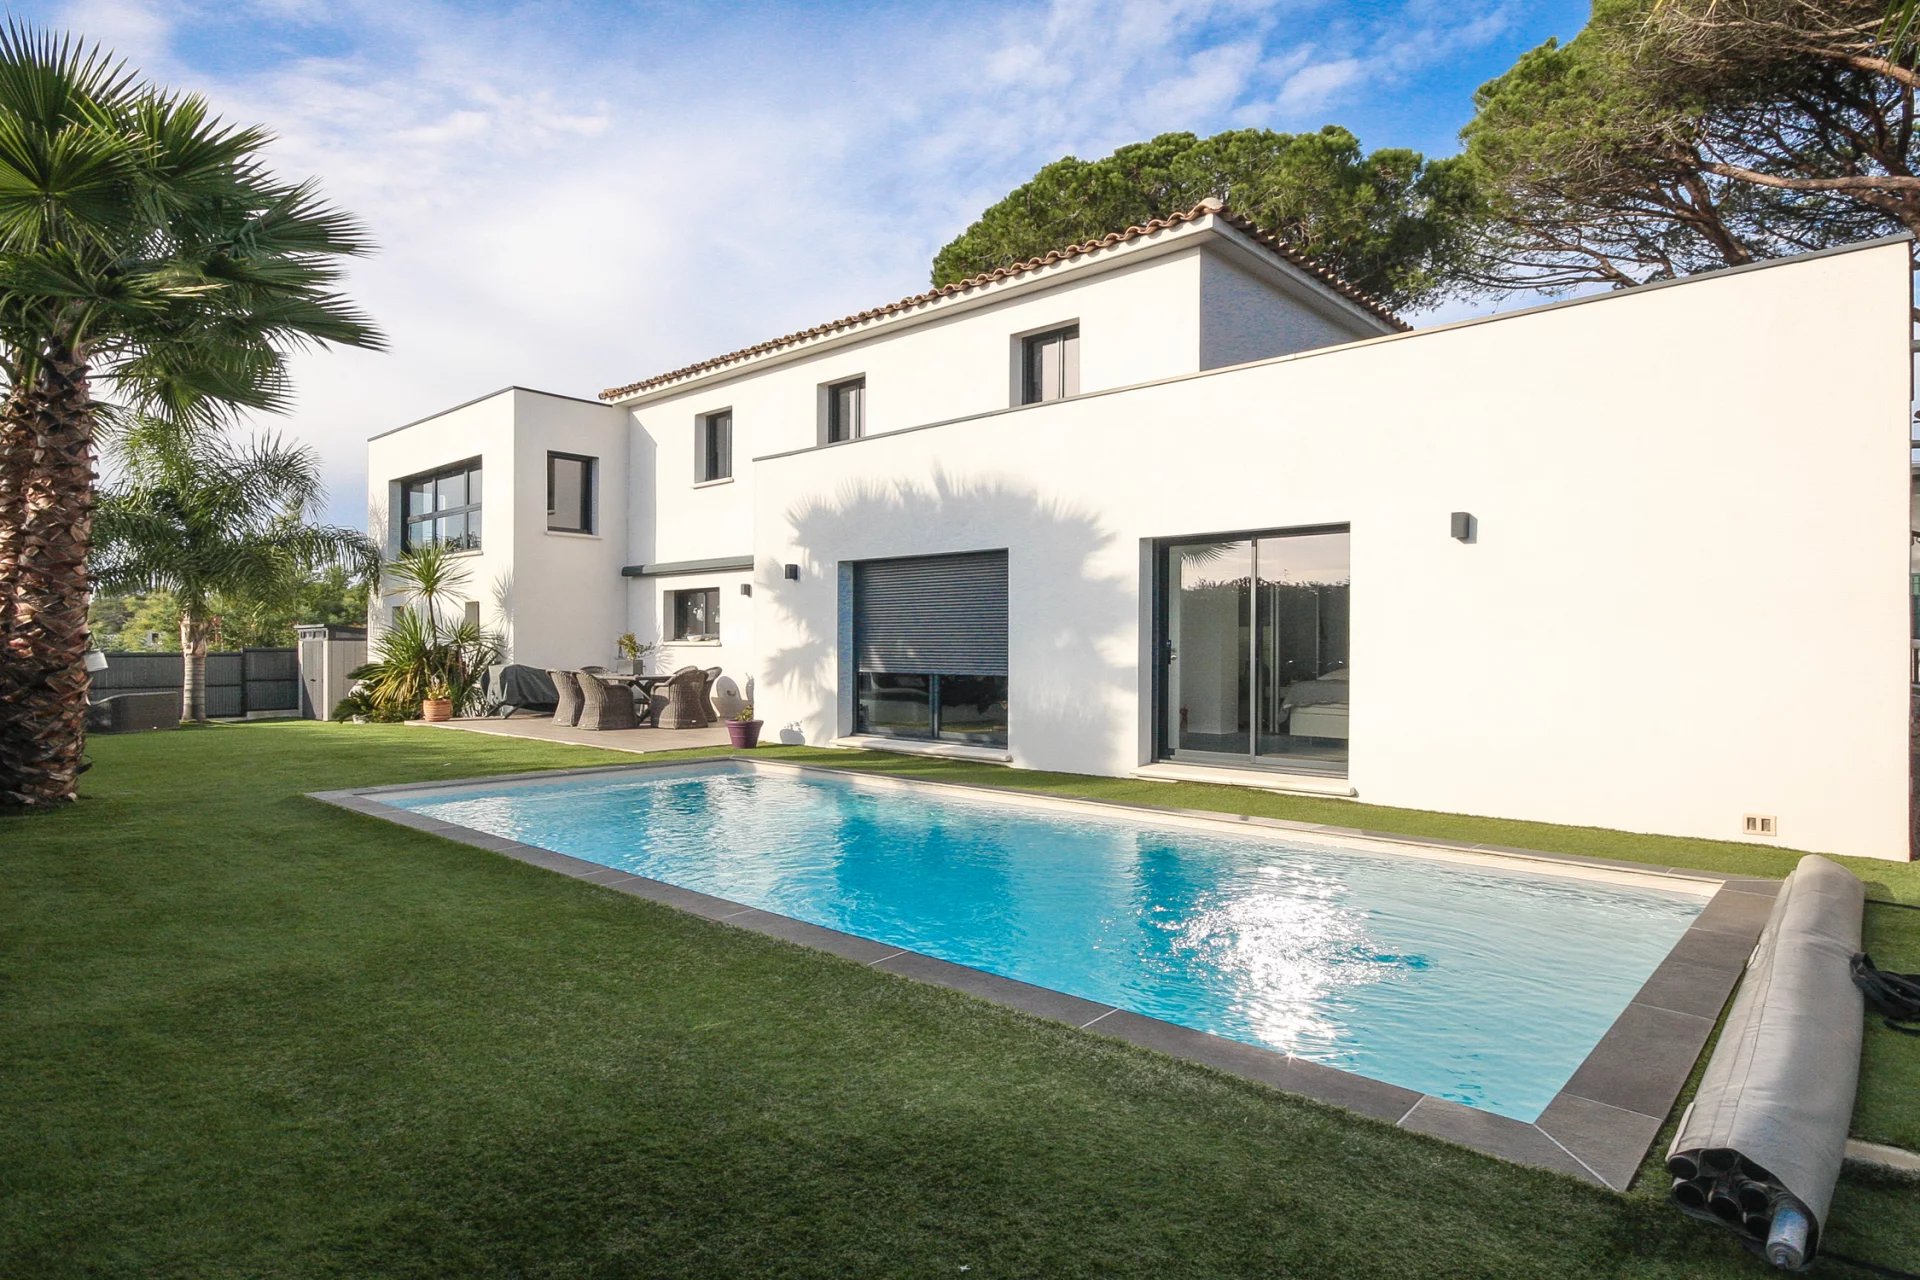 CONTEMPORARY VILLA WITH POOL AT SAINT RAPHAEL 10 mn driving FROM THE SEA